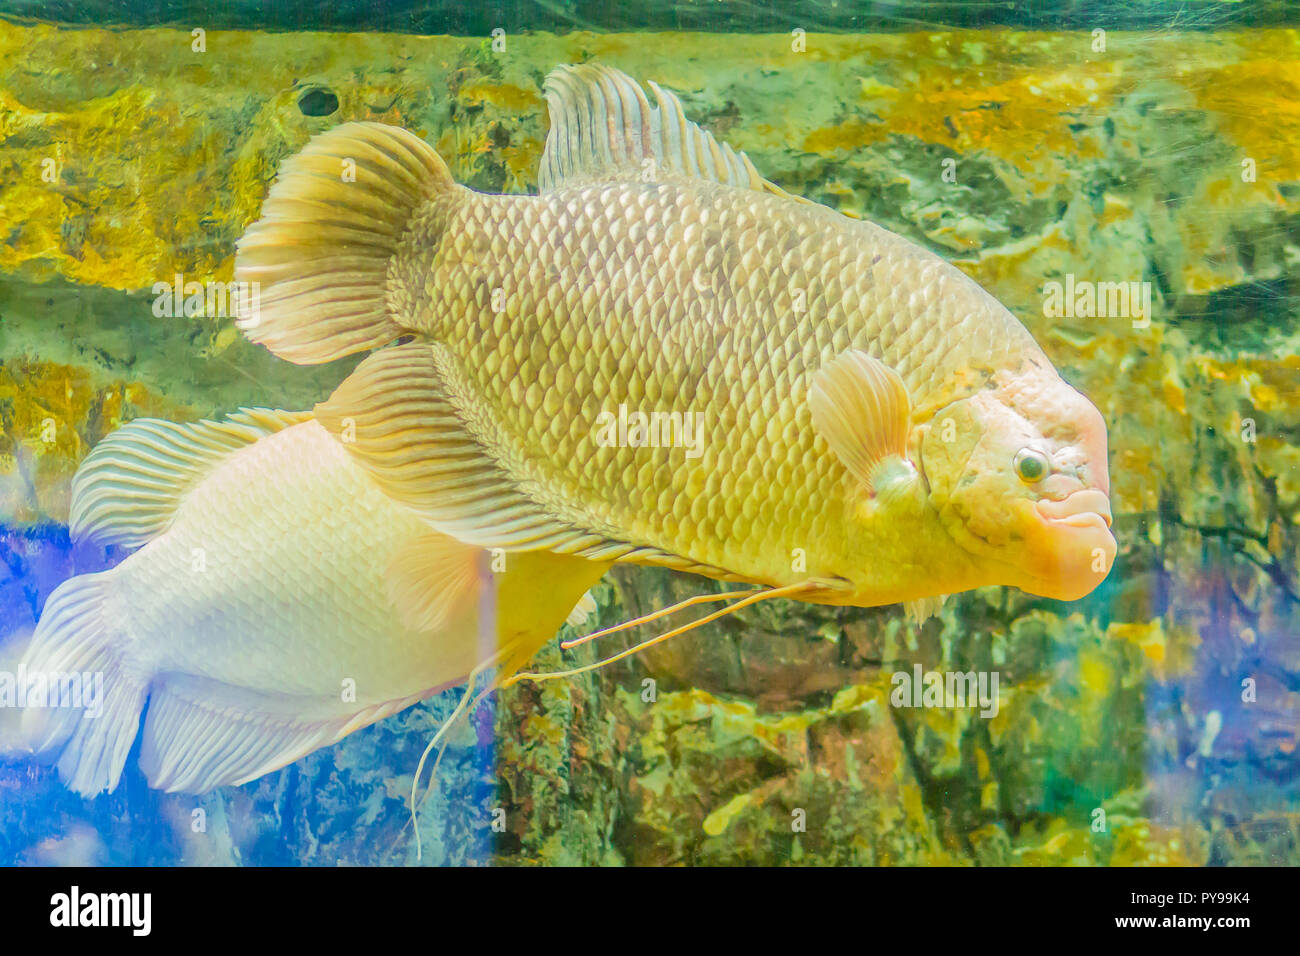 Giant gourami (Osphronemus goramy)fish, a species of large gourami native to Southeast Asia. It lives in fresh or brackish water, particularly slow-mo Stock Photo